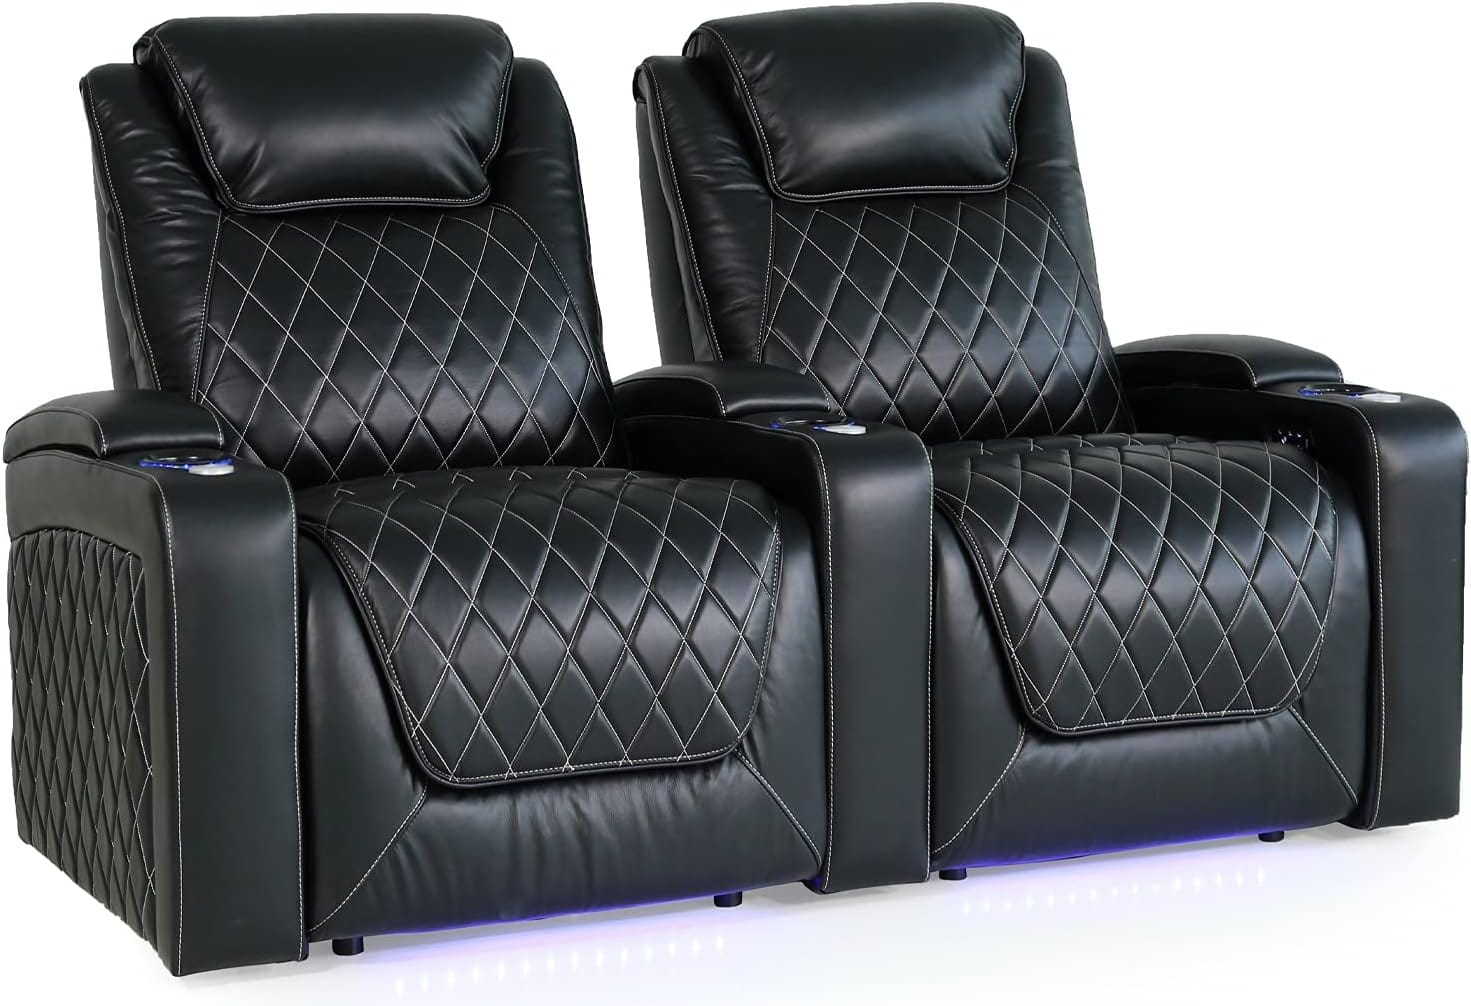 by Valencia Seating Sofa Row of 2 | Width: 71.5" Height: 45" Depth: 38" / MIdnight Black / Regular Spec (300 LBs Sitting Weight Limit) Valencia Oslo XL Home Theater Seating